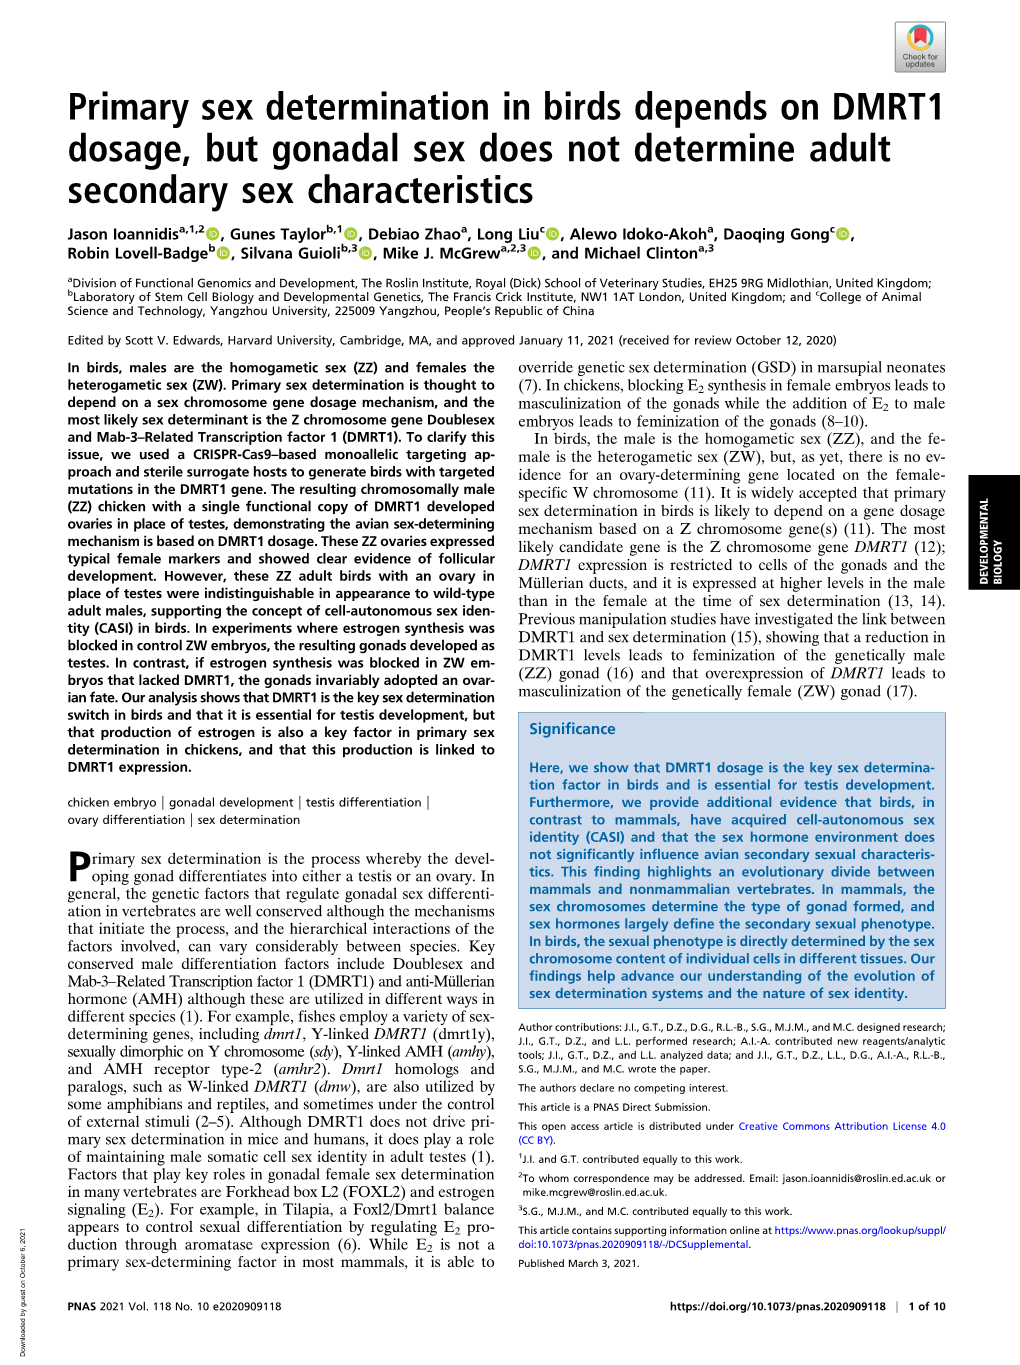 Primary Sex Determination in Birds Depends on DMRT1 Dosage, but Gonadal Sex Does Not Determine Adult Secondary Sex Characteristics